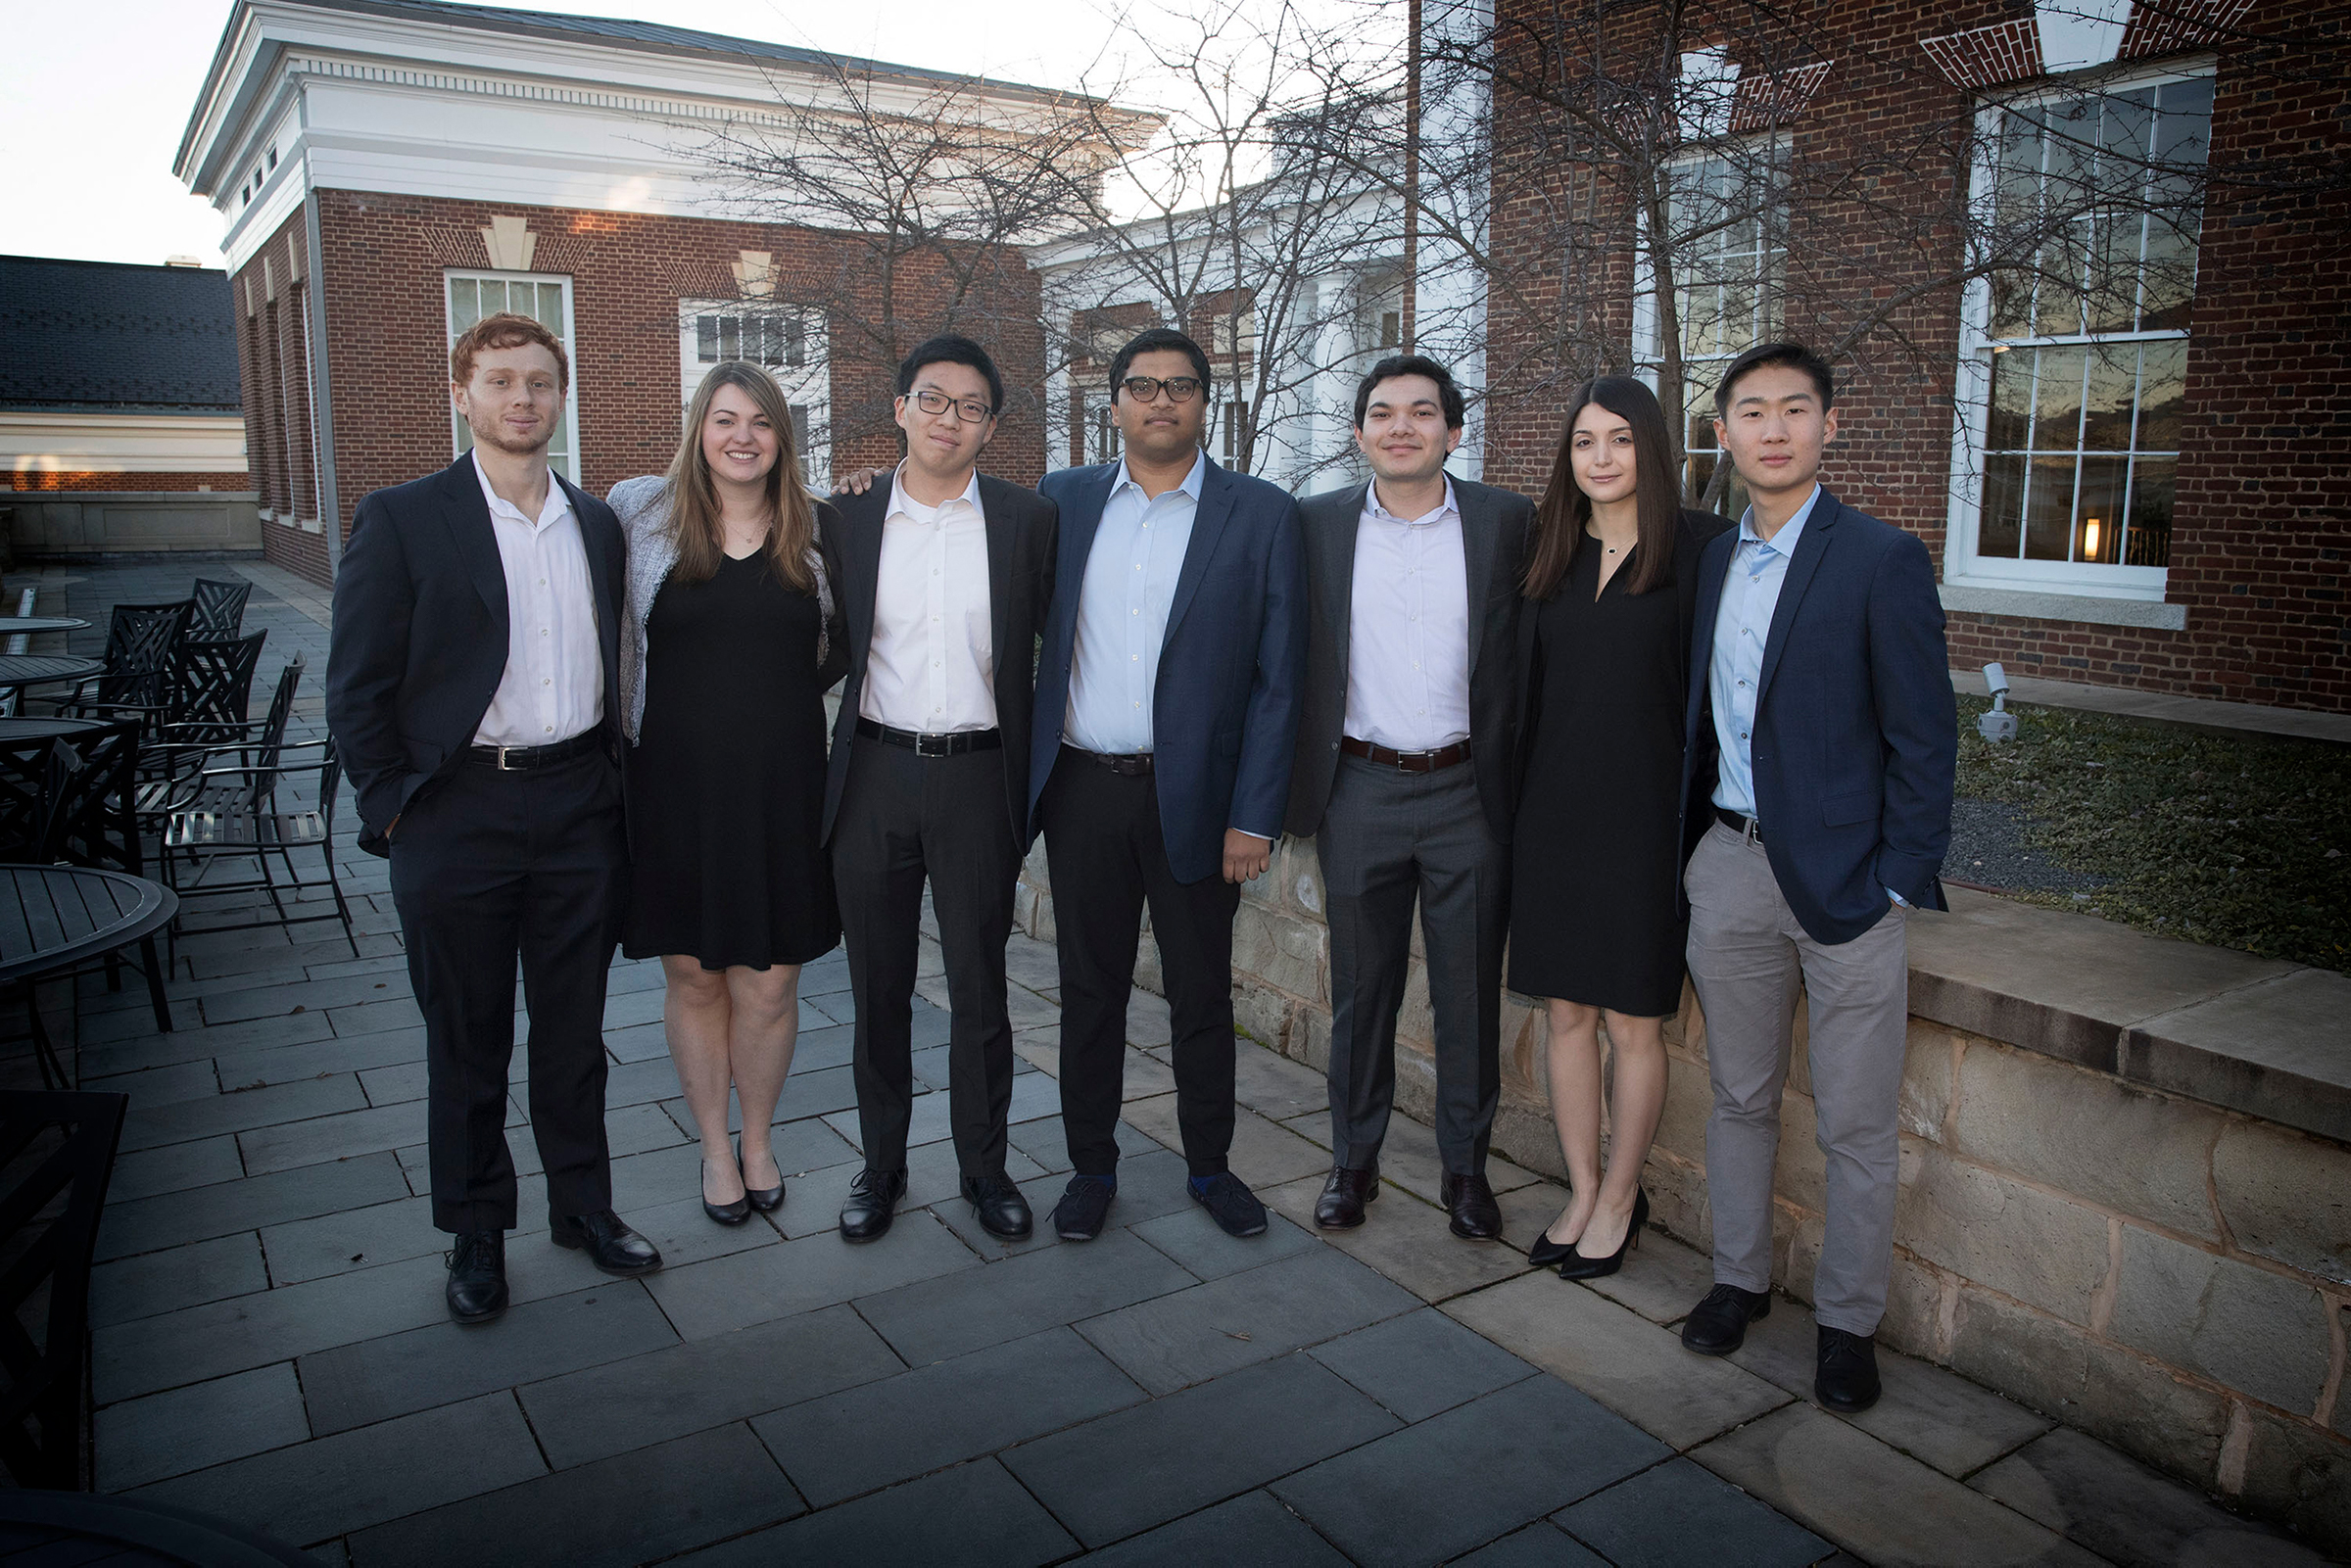 Left to right: Josh Blutfield, Joanna Shaw, Nathan Lin, Abhijith Chaganti, Christopher DeSouza, Marisa Lombardi and Richard Song stand together for a picture